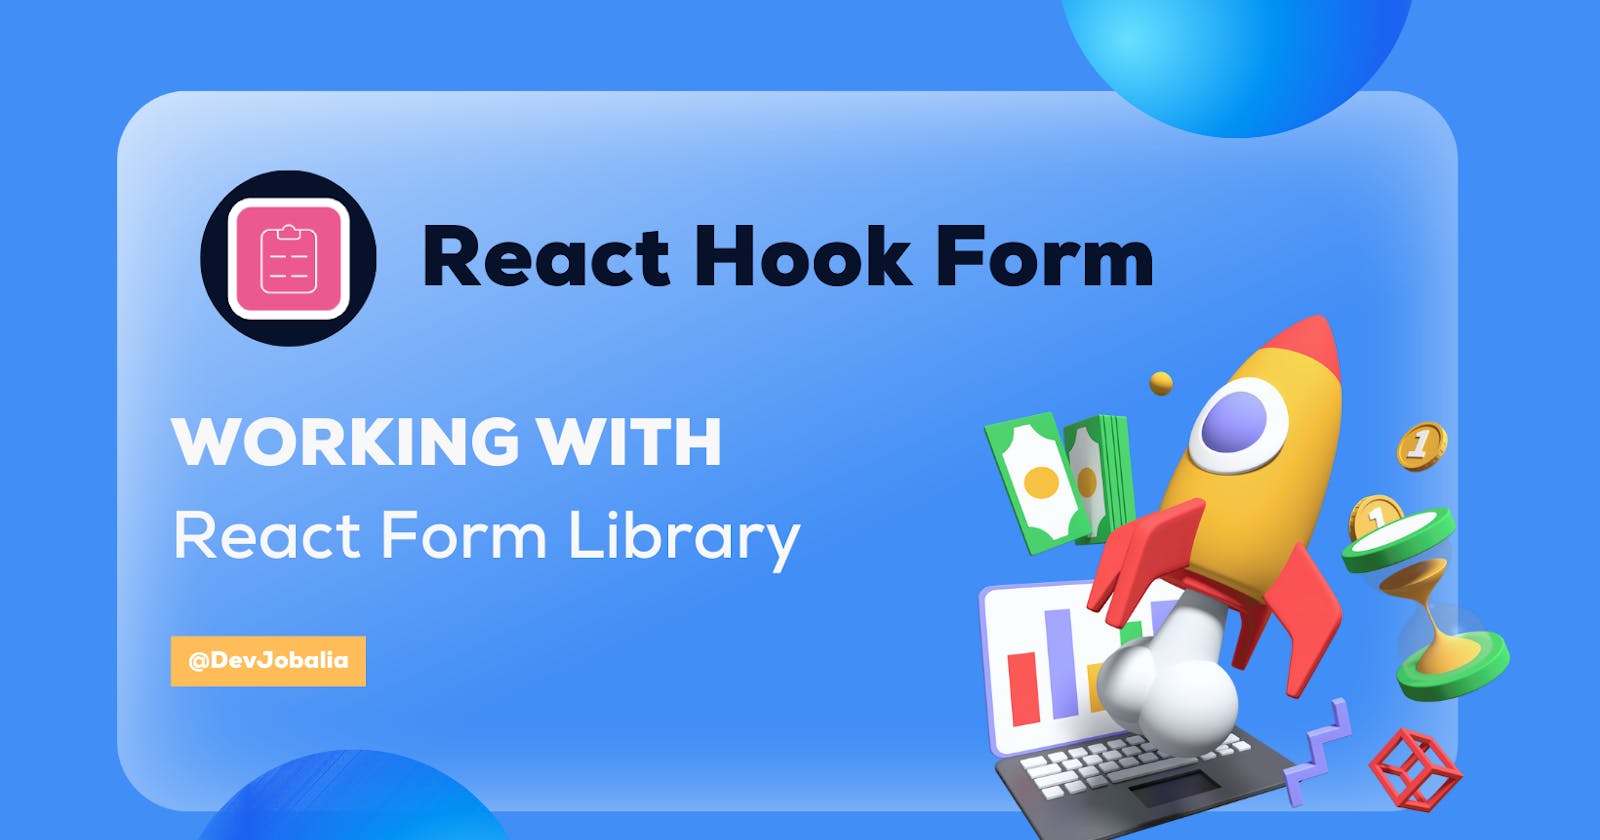 REACT FORM LIBRARY: React Hook Form